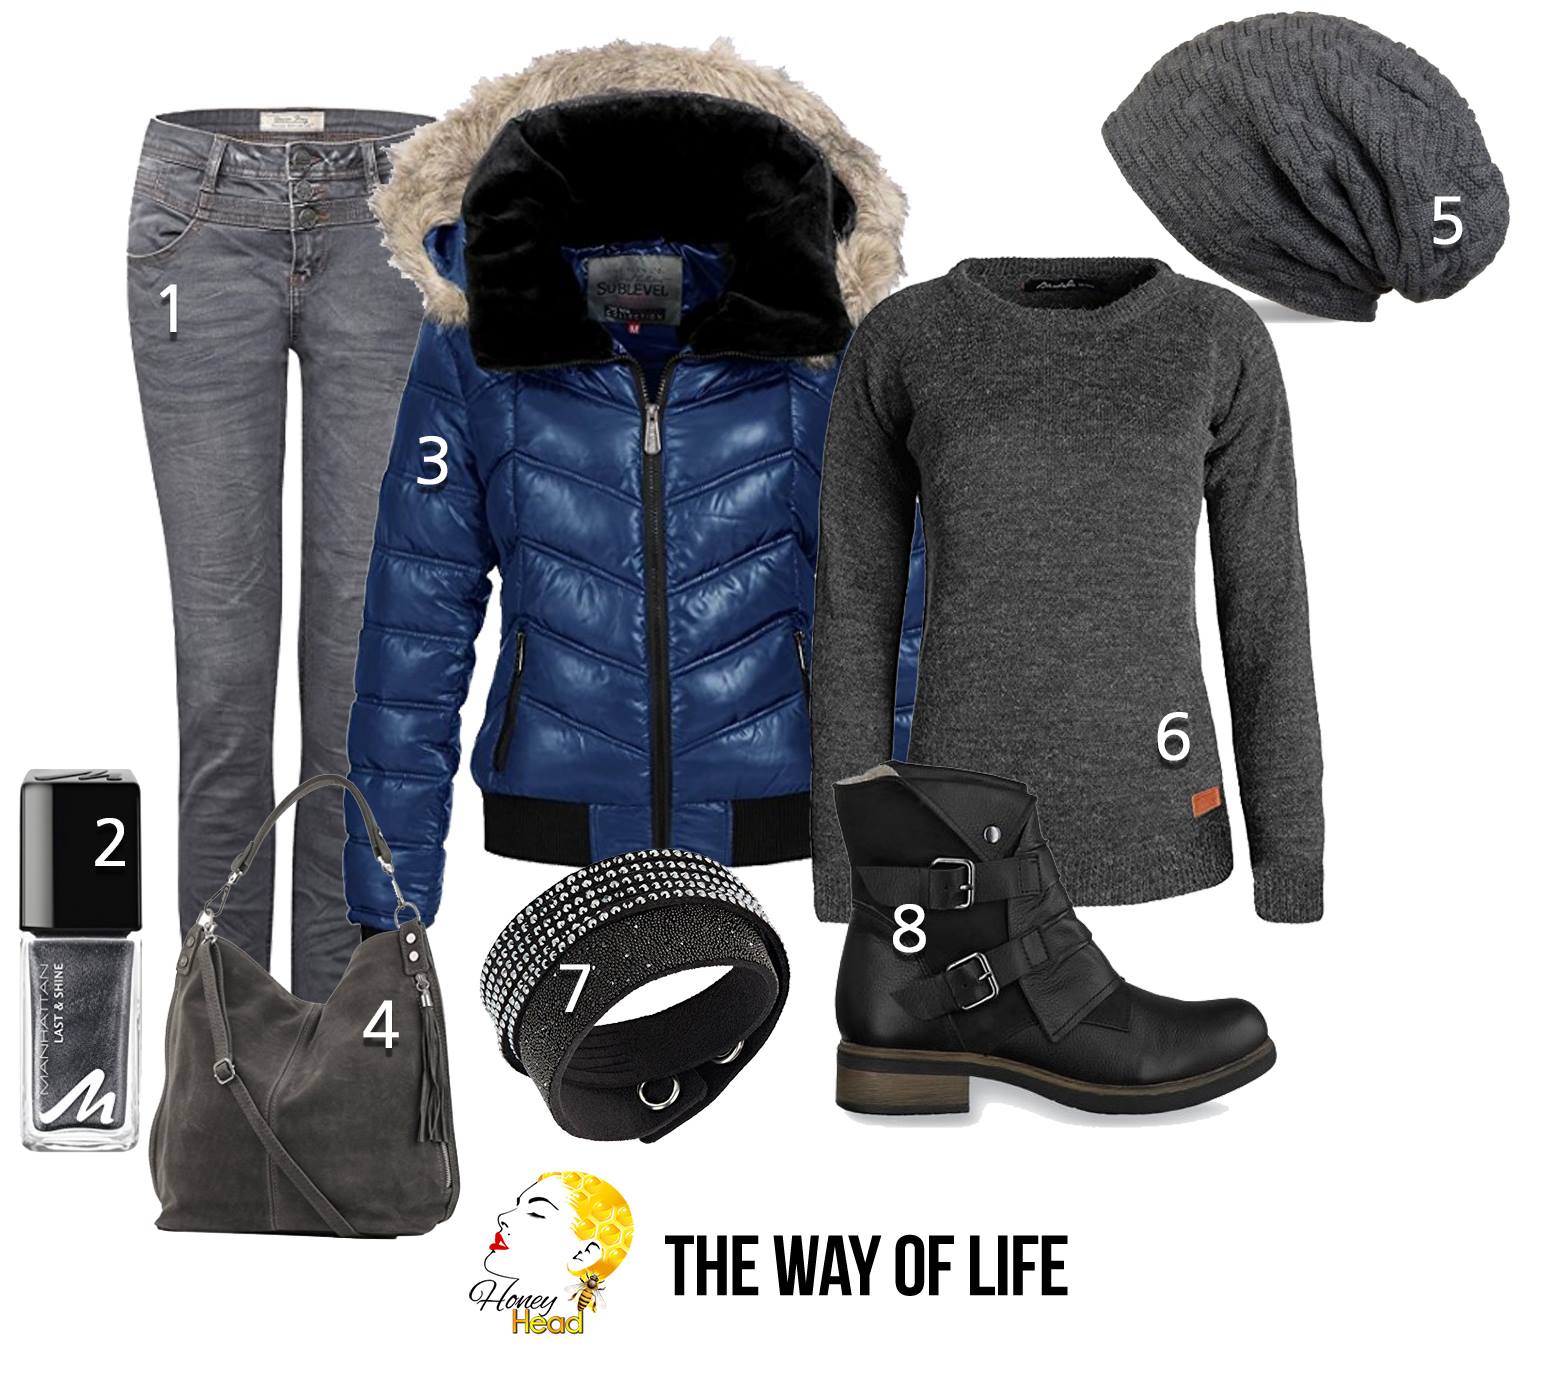 FASHION INSPIRATION / Wishlist Outfit - Honey Head - The Way Of Life!